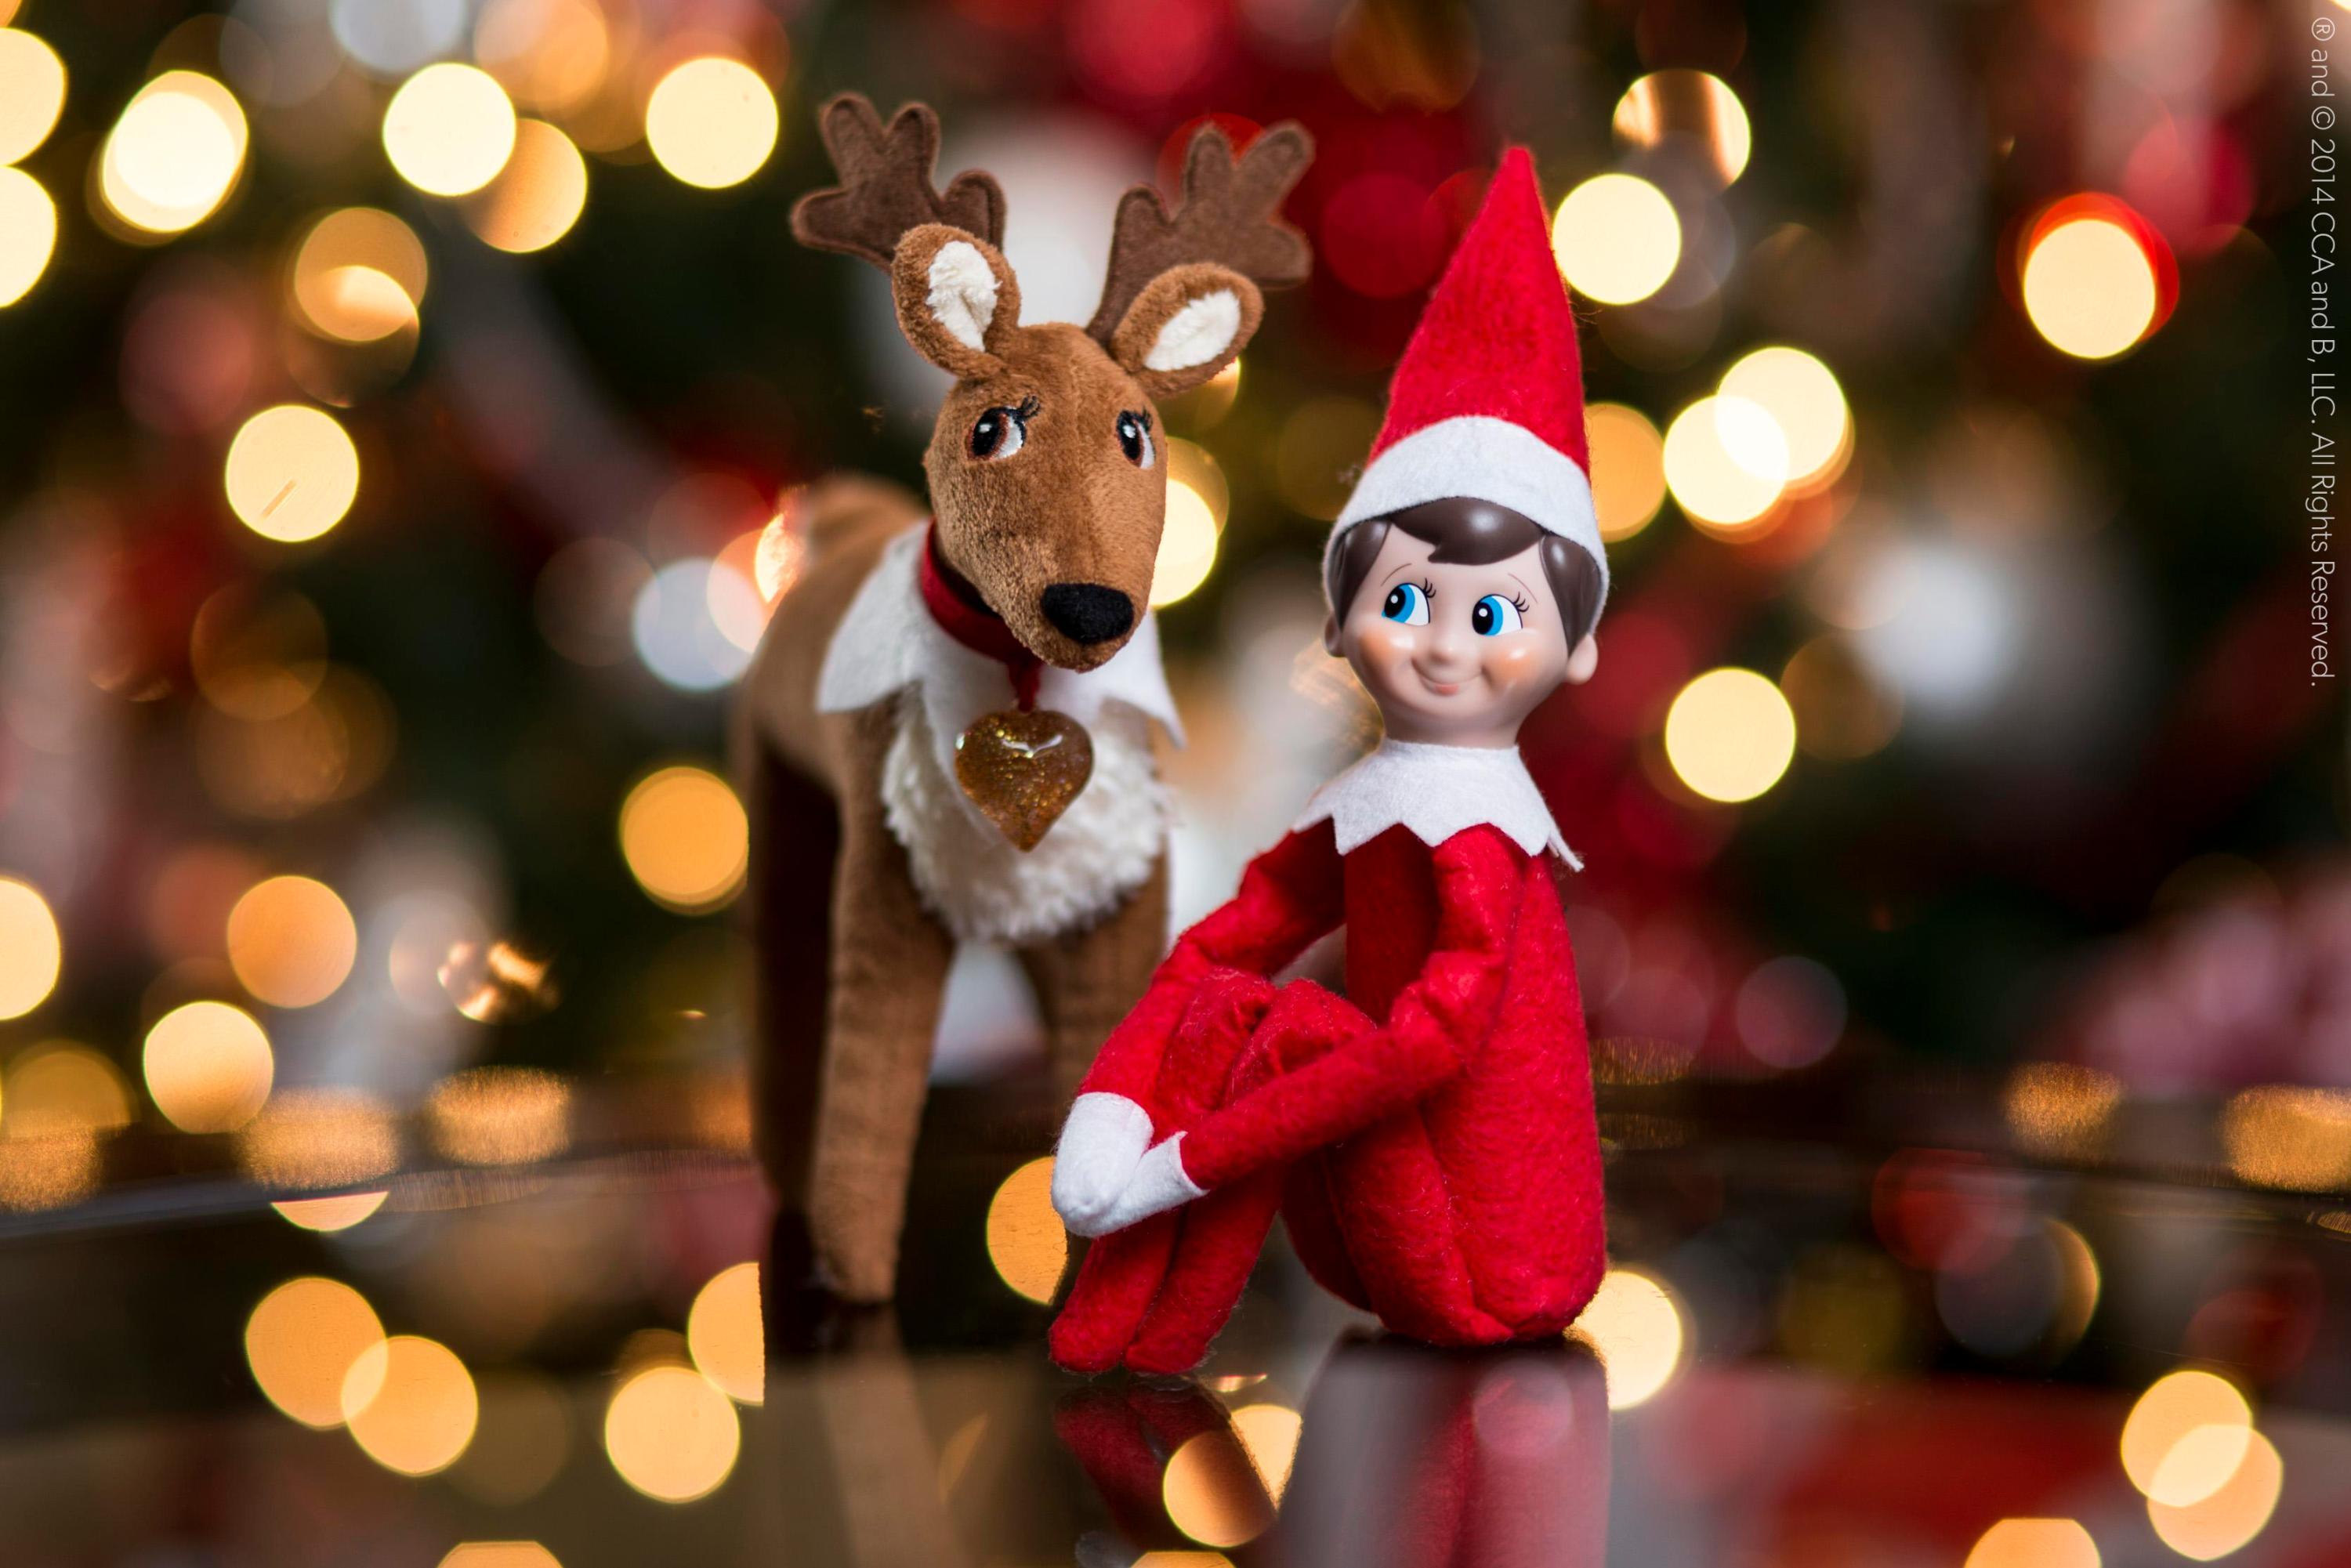  Fun facts about Elf on the Shelf you never knew before SheKnows